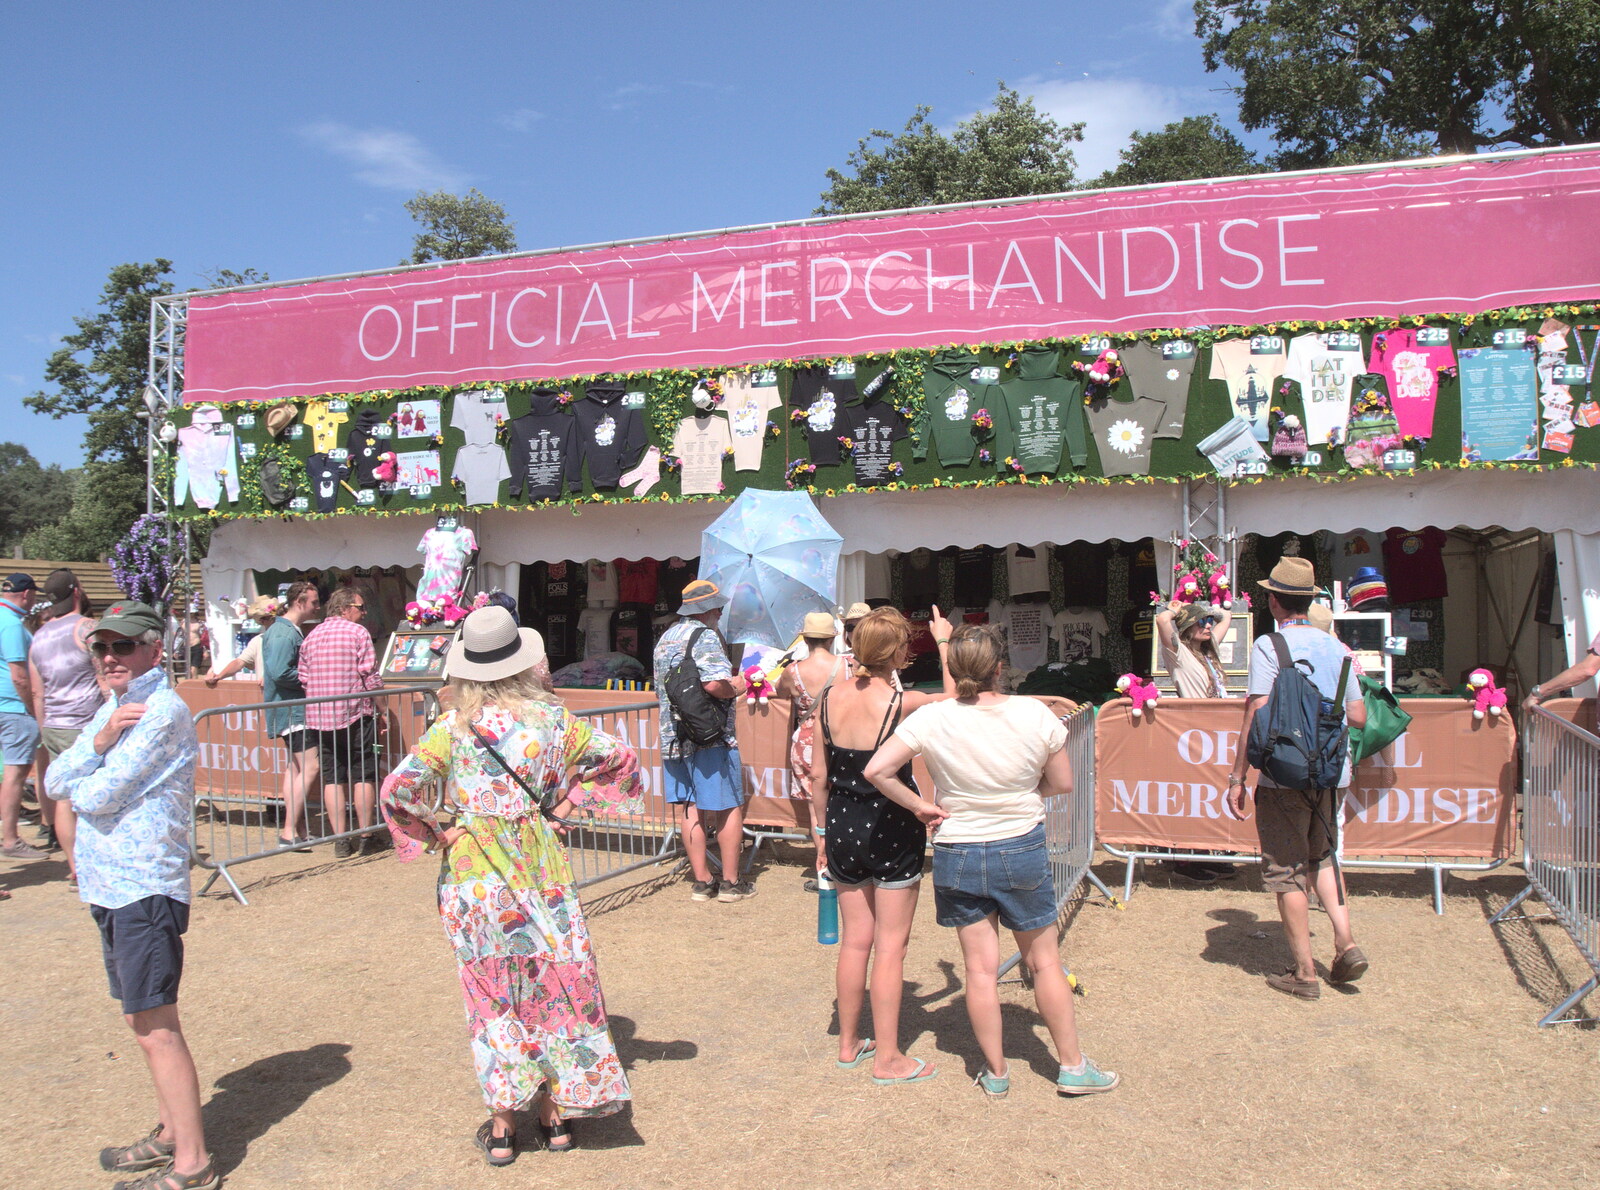 A Day at Latitude, Henham Park, Suffolk - 24th July 2022: Isobel gets gouged at the merchandise stand